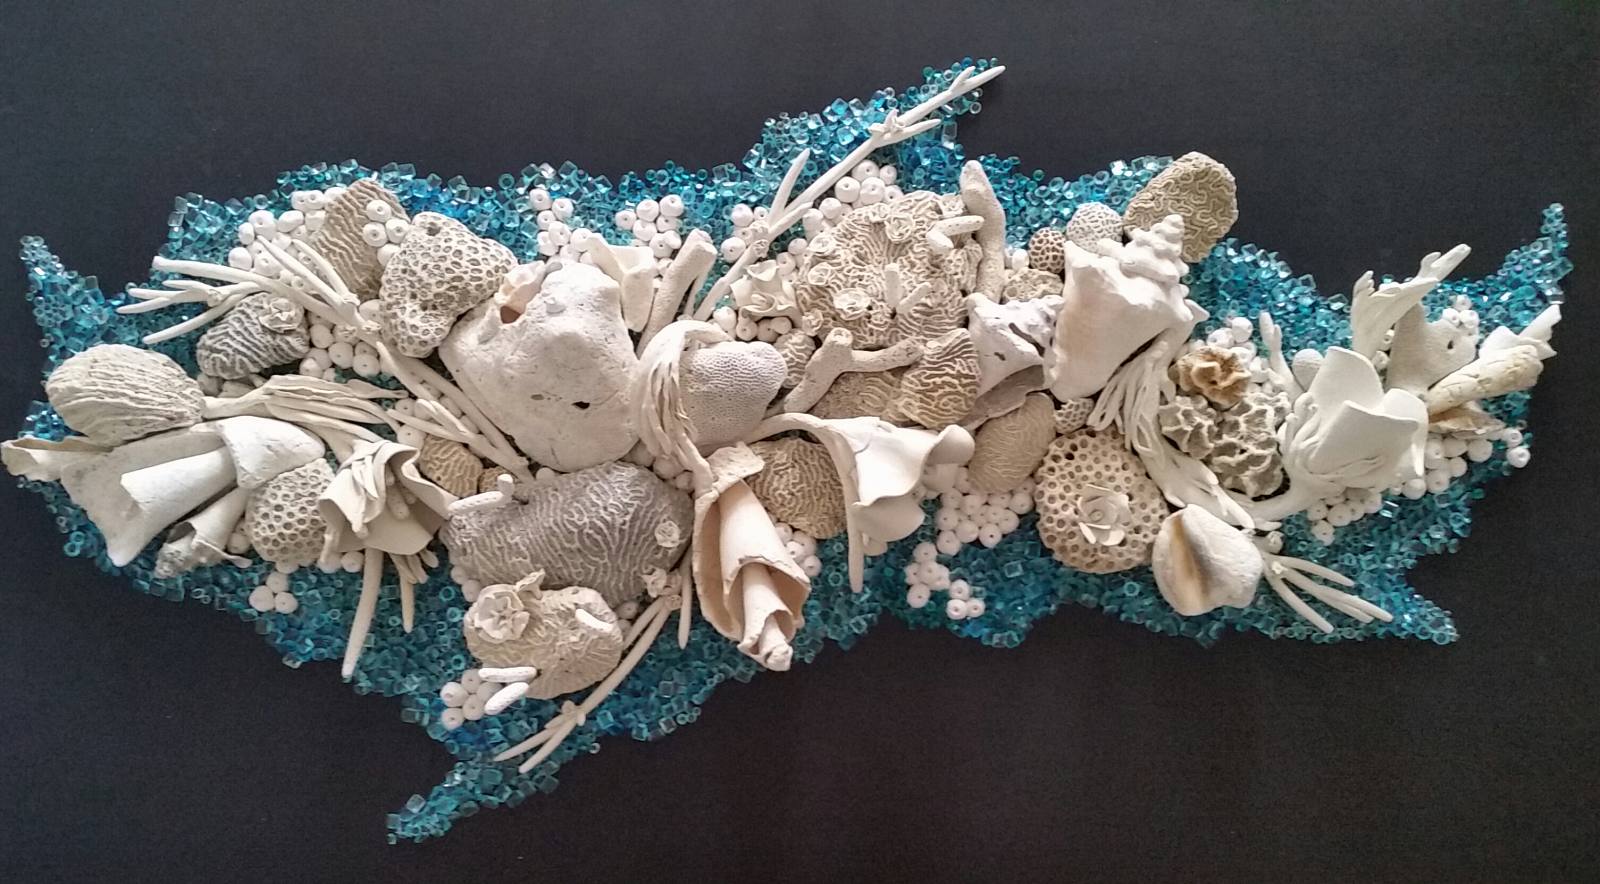 Ghosts of the Seas, ceramic and mixed media installation